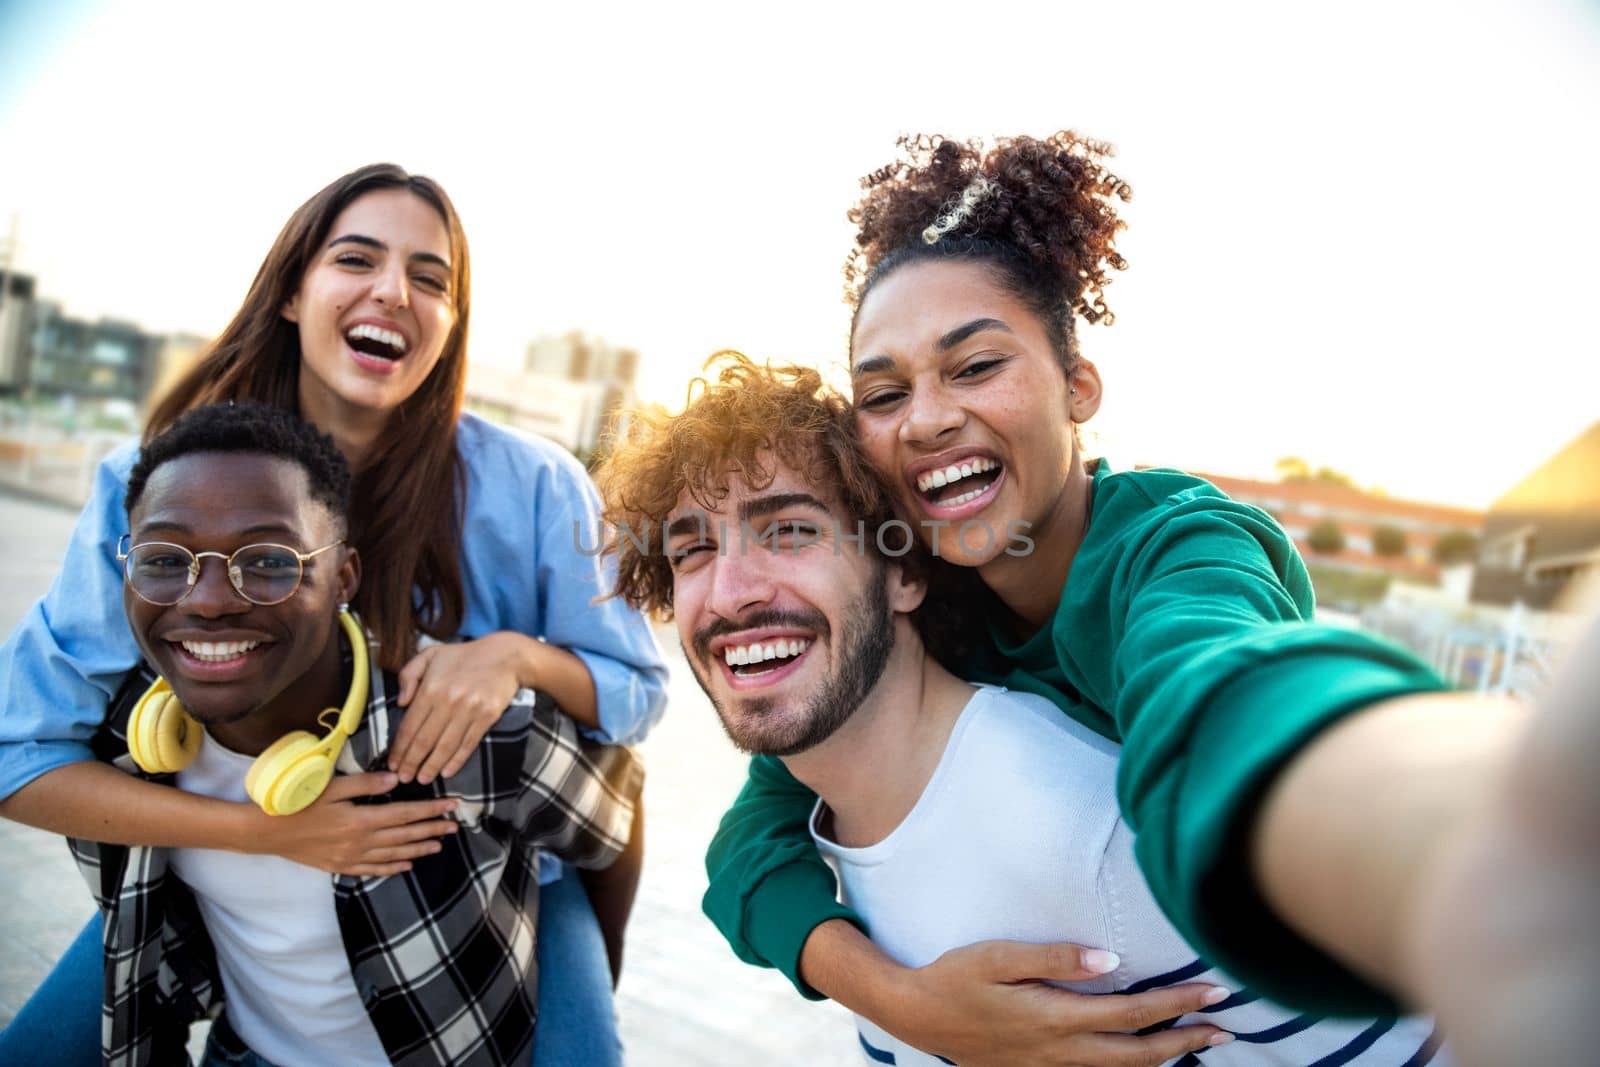 Multiracial happy friends having fun taking group selfie portrait on city street. Young multicultural people celebrating laughing together outdoors. Happy lifestyle concept.